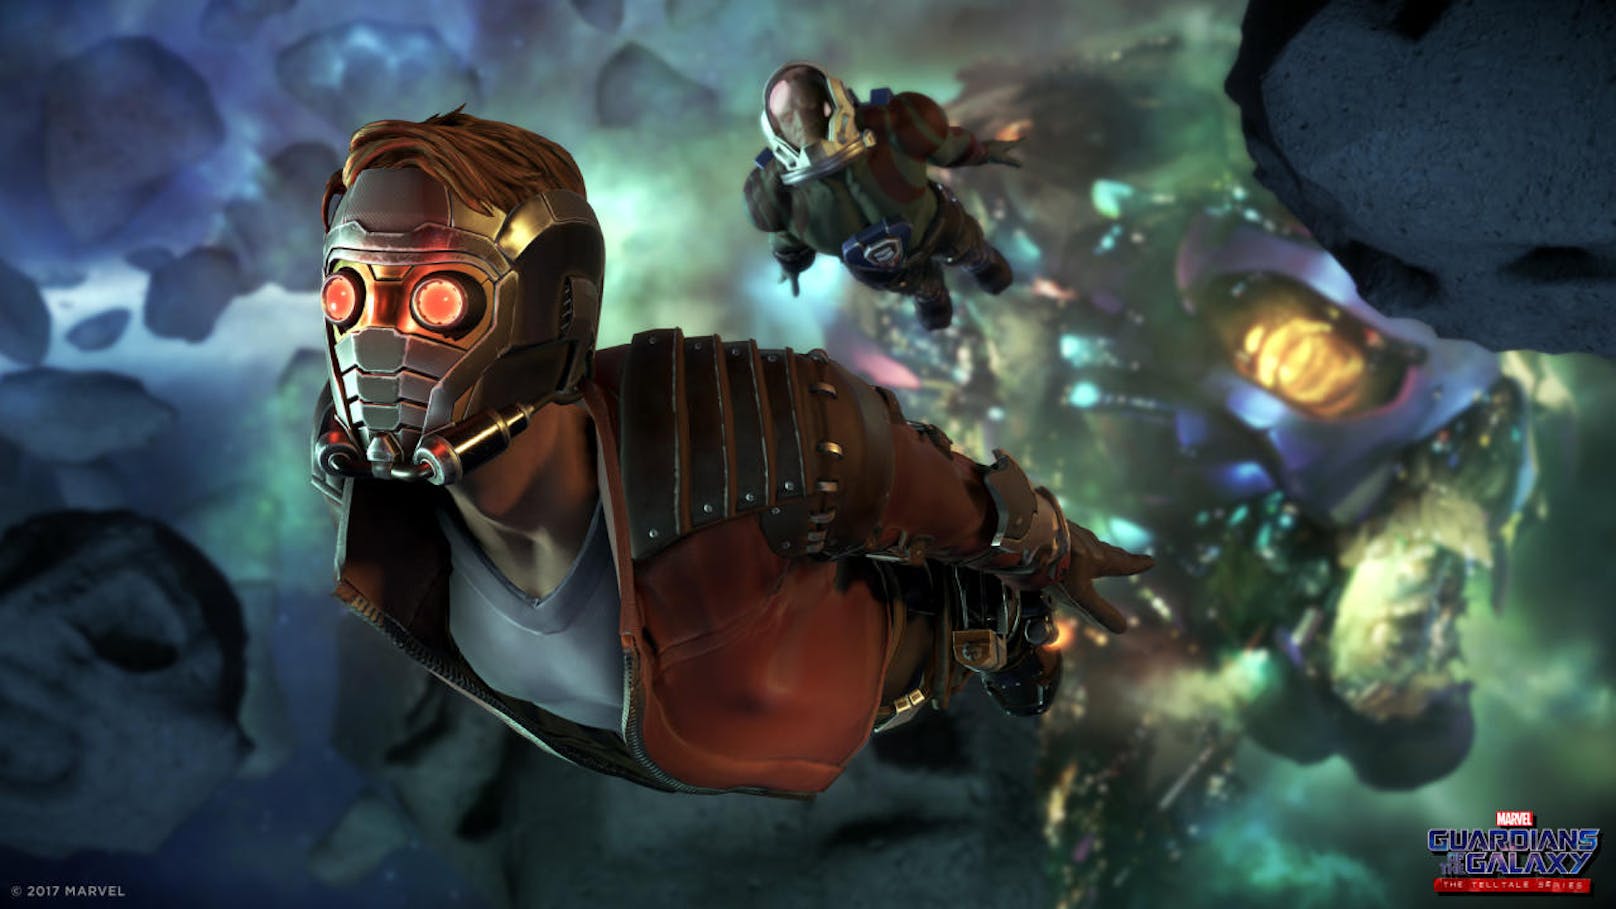  <a href="https://www.heute.at/digital/games/story/Guardians-of-the-Galaxy--The-Telltale-Series-im-Test-40347318" target="_blank">Guardians of the Galaxy: The Telltale Series</a>